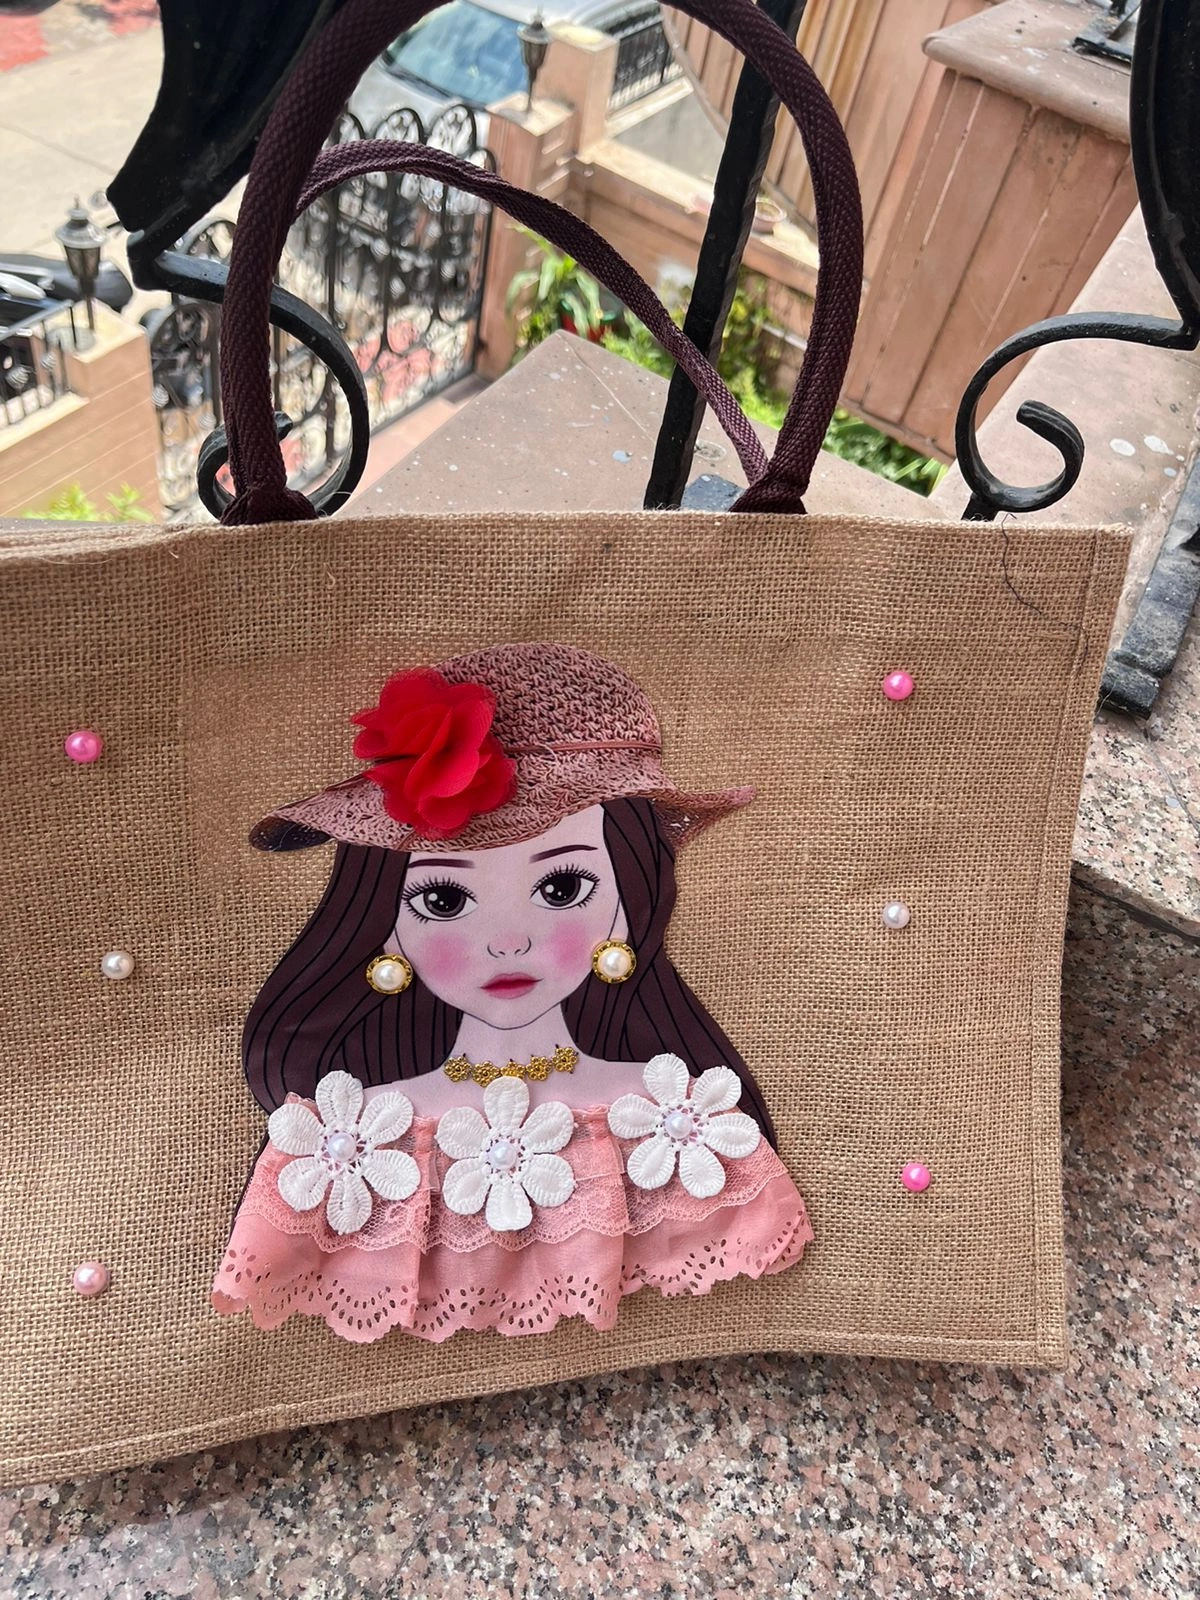 Personalized Jute Bags with Some Thoughtful Gifts-1